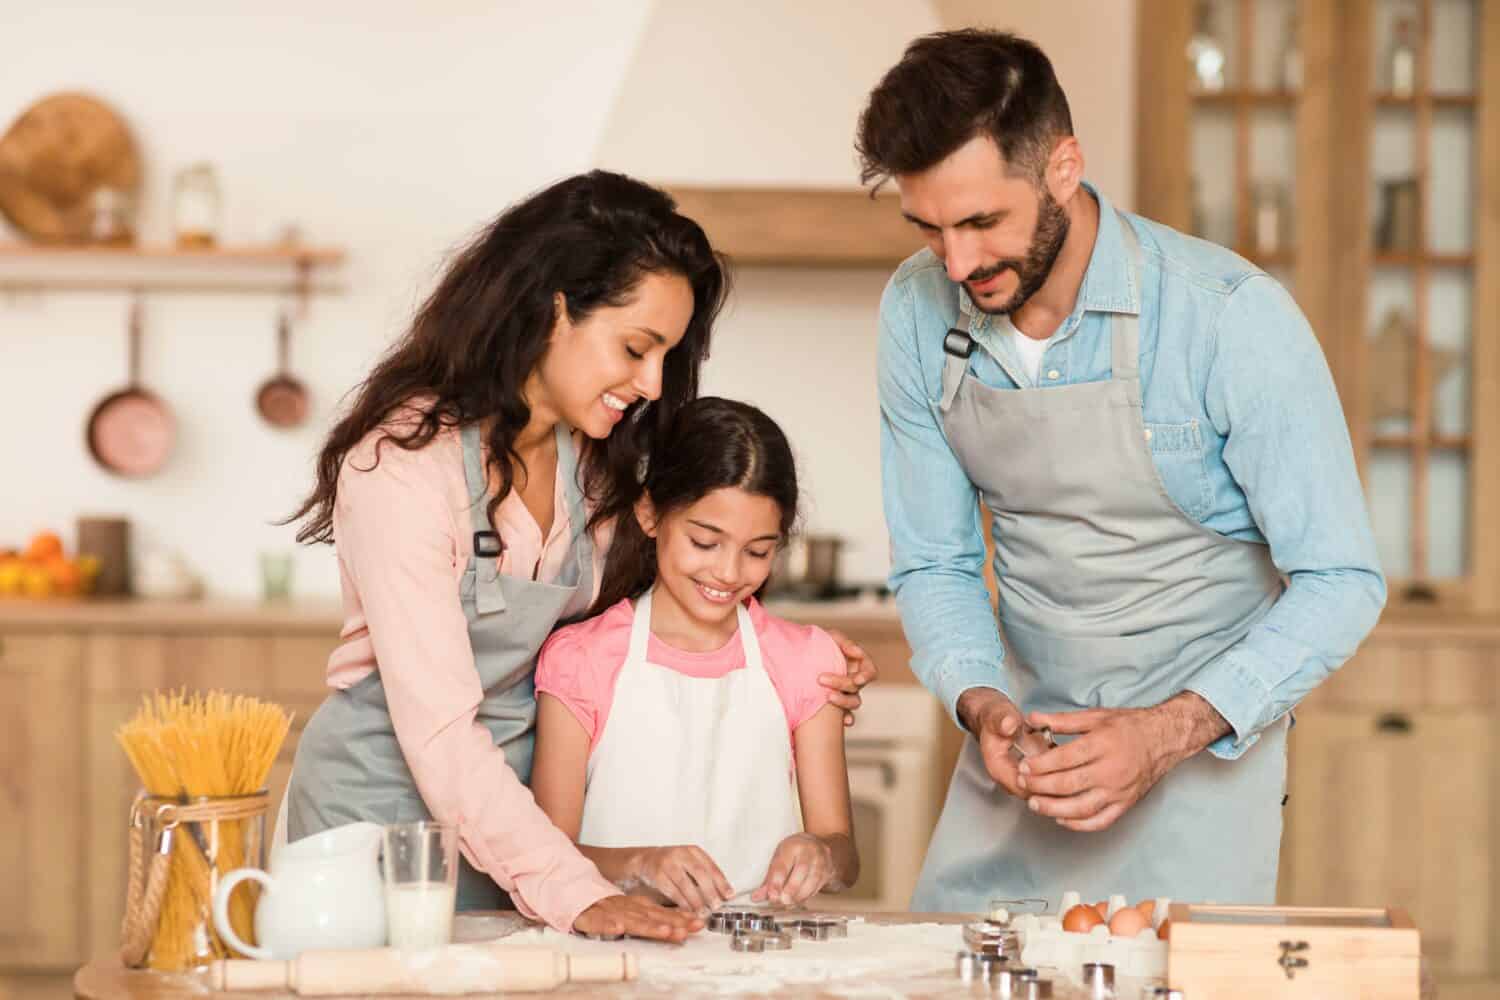 Warm family kitchen scene with mother, father and daughter using cookie cutters on dough, creating nurturing and educational baking experience